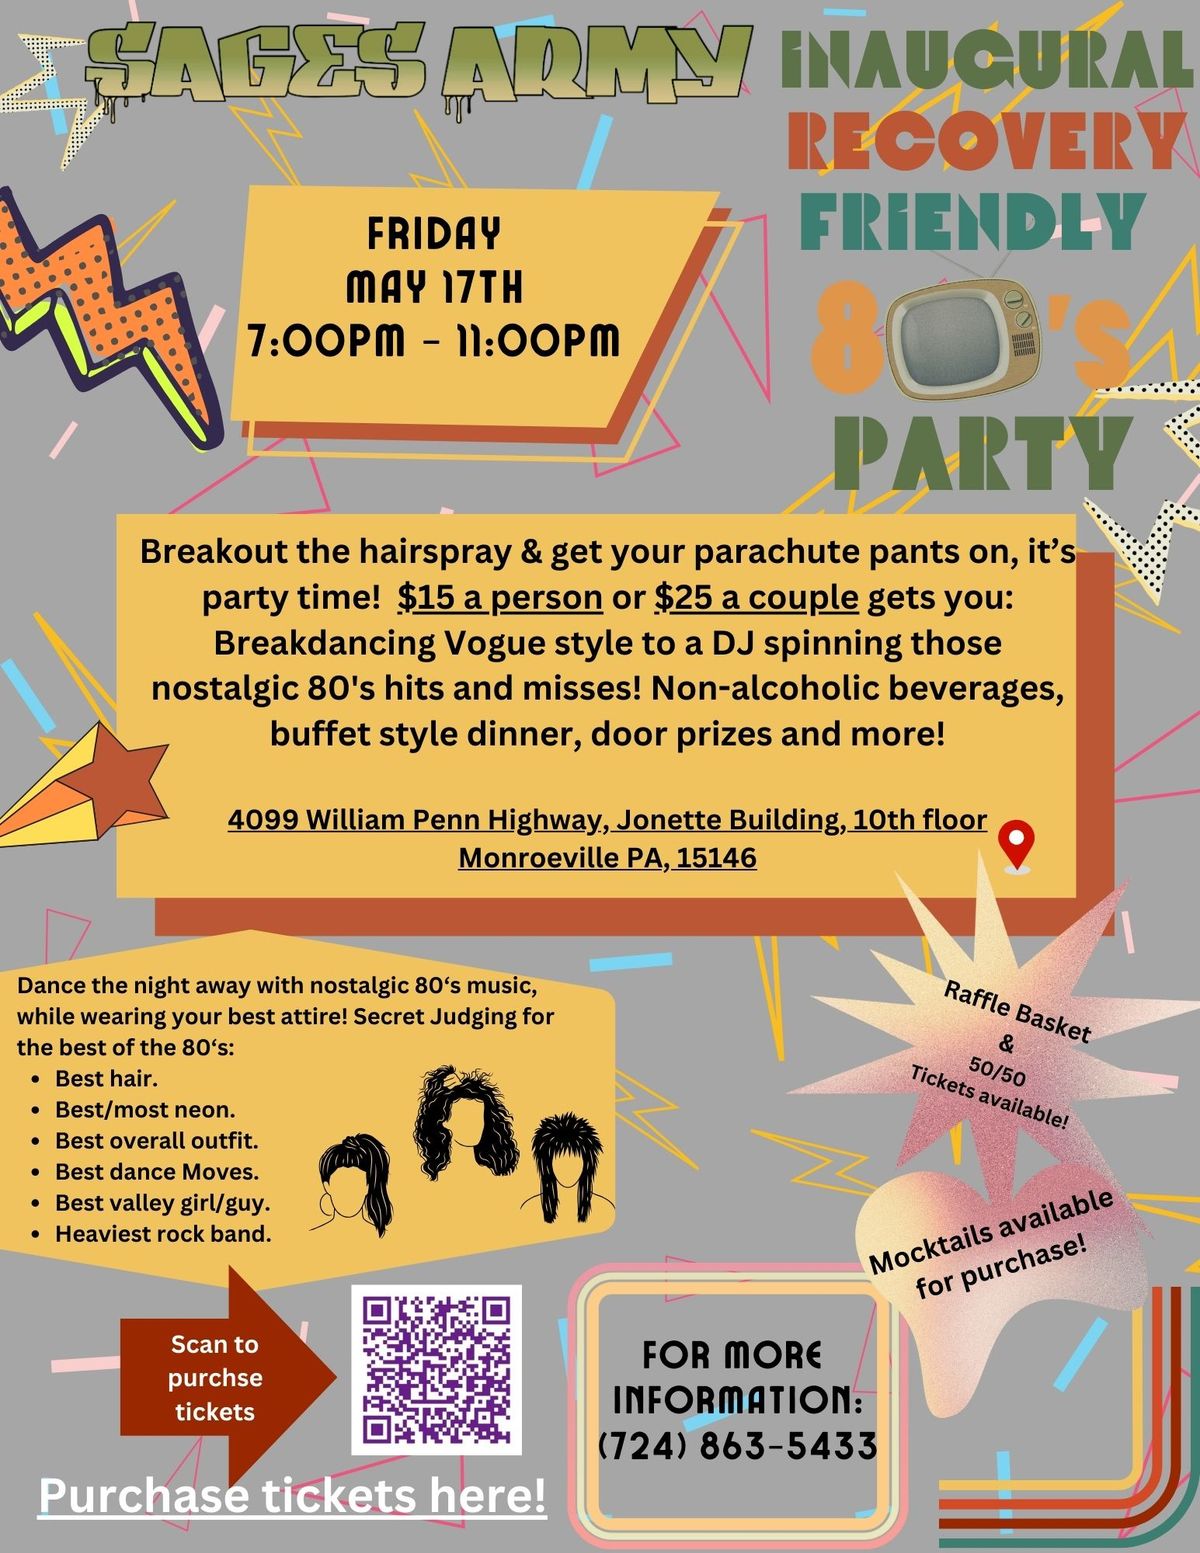 Inaugural Recovery Friendly 80's Party